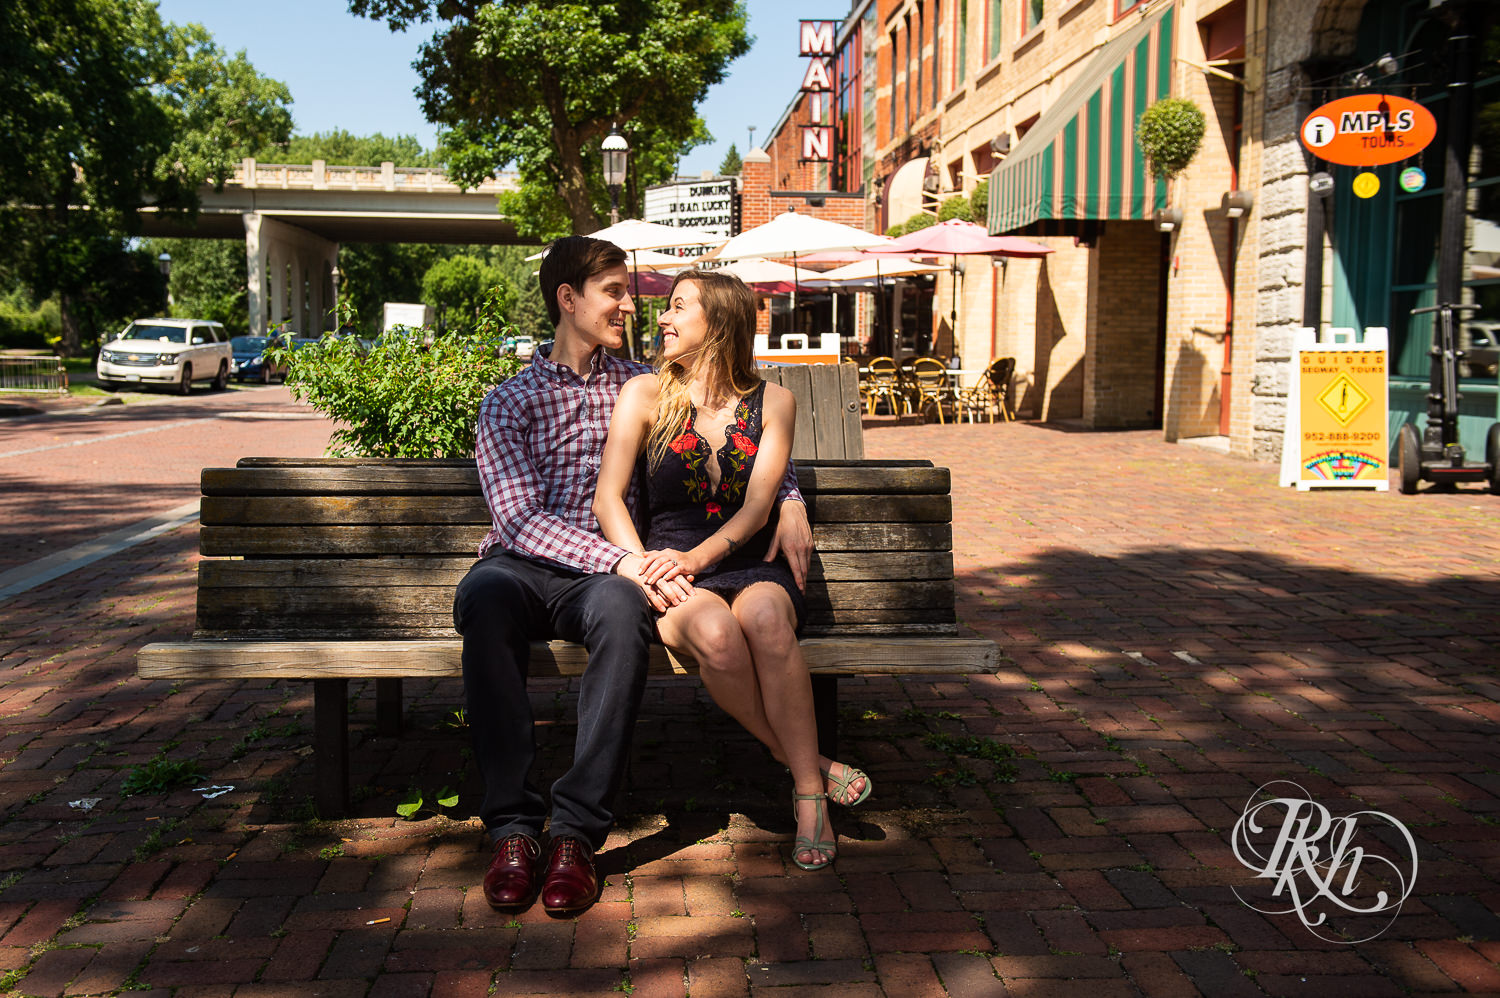 Man and woman in black lace dress sit on bench in Saint Anthony Main in Minneapolis, Minnesota.